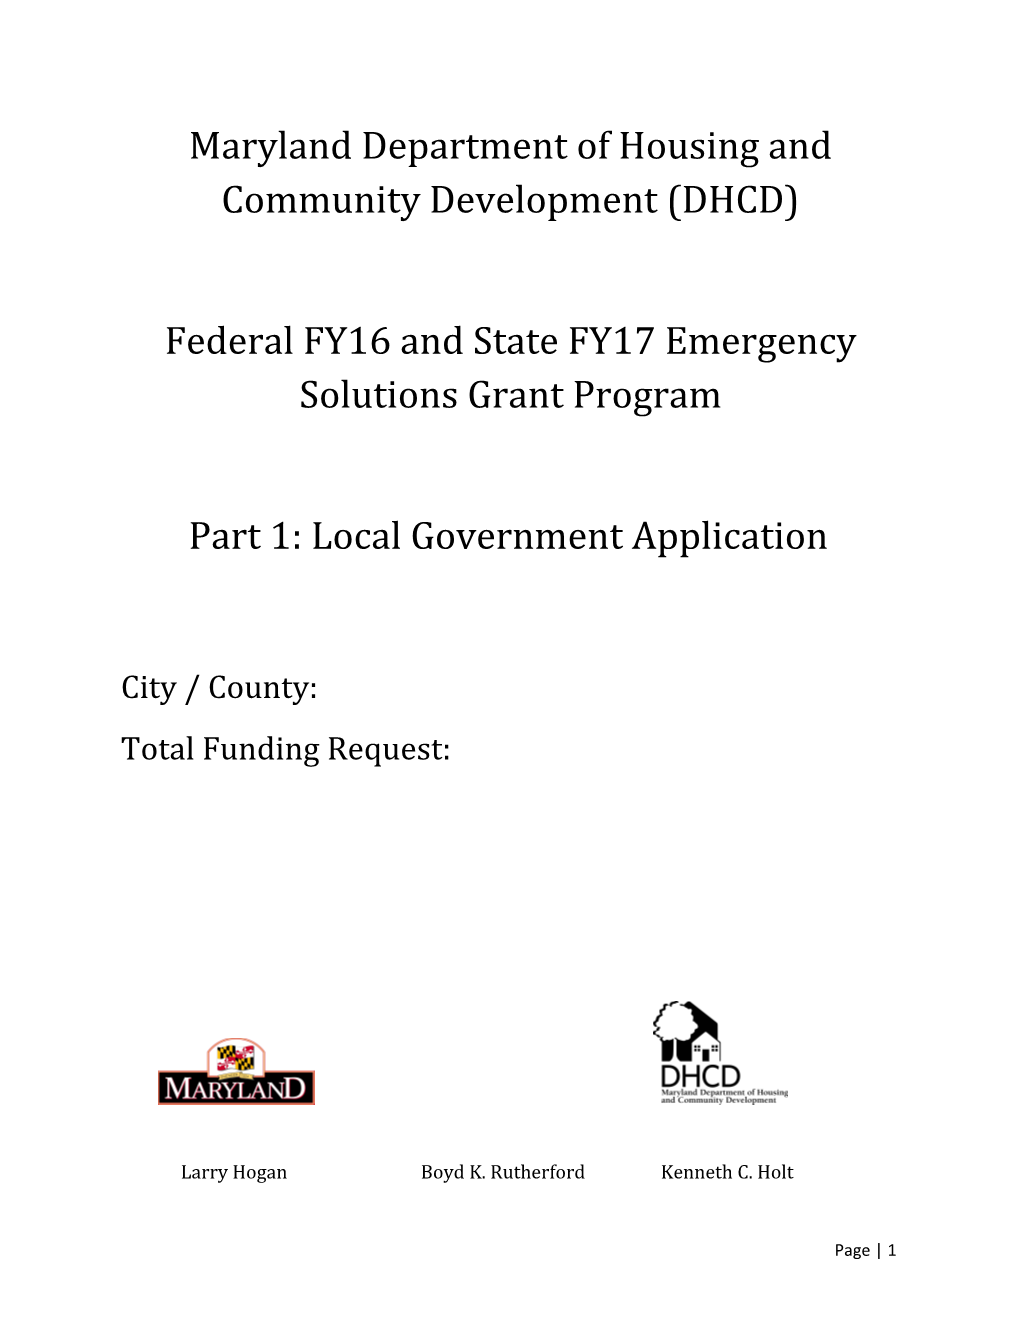 Local Government Application (Part 1)